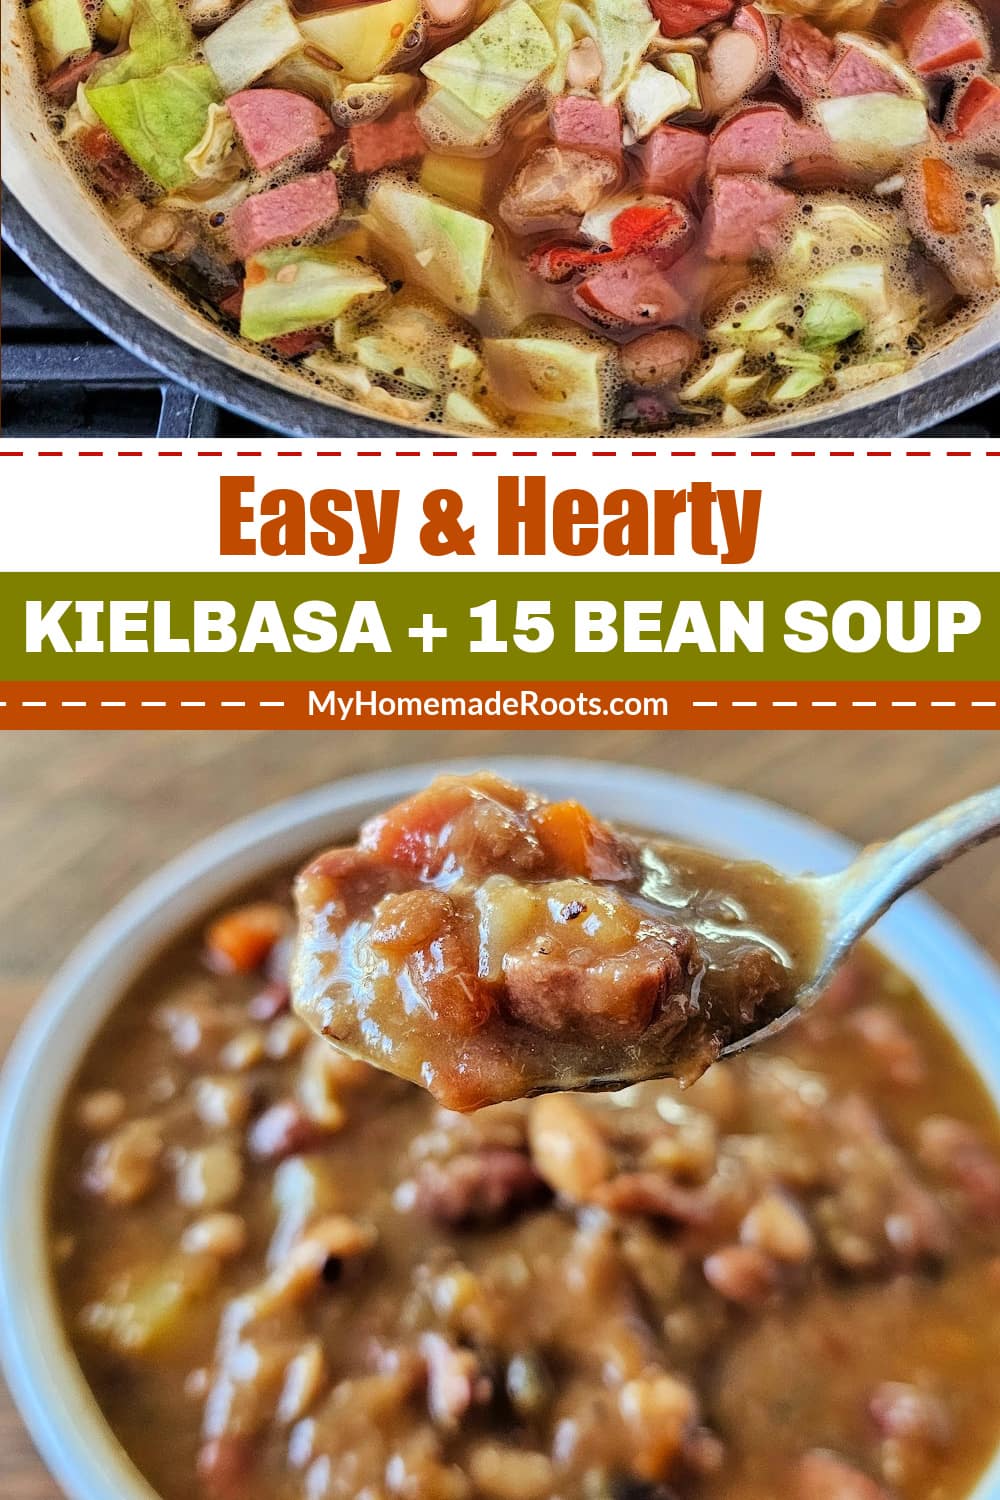 This made from scratch bean soup is rich and delicious. With a mixture of beans and veggies plus a generous amount of smoky kielbasa sausage, this Kielbasa and 15-Bean Soup is one very comforting and flavor-packed soup.